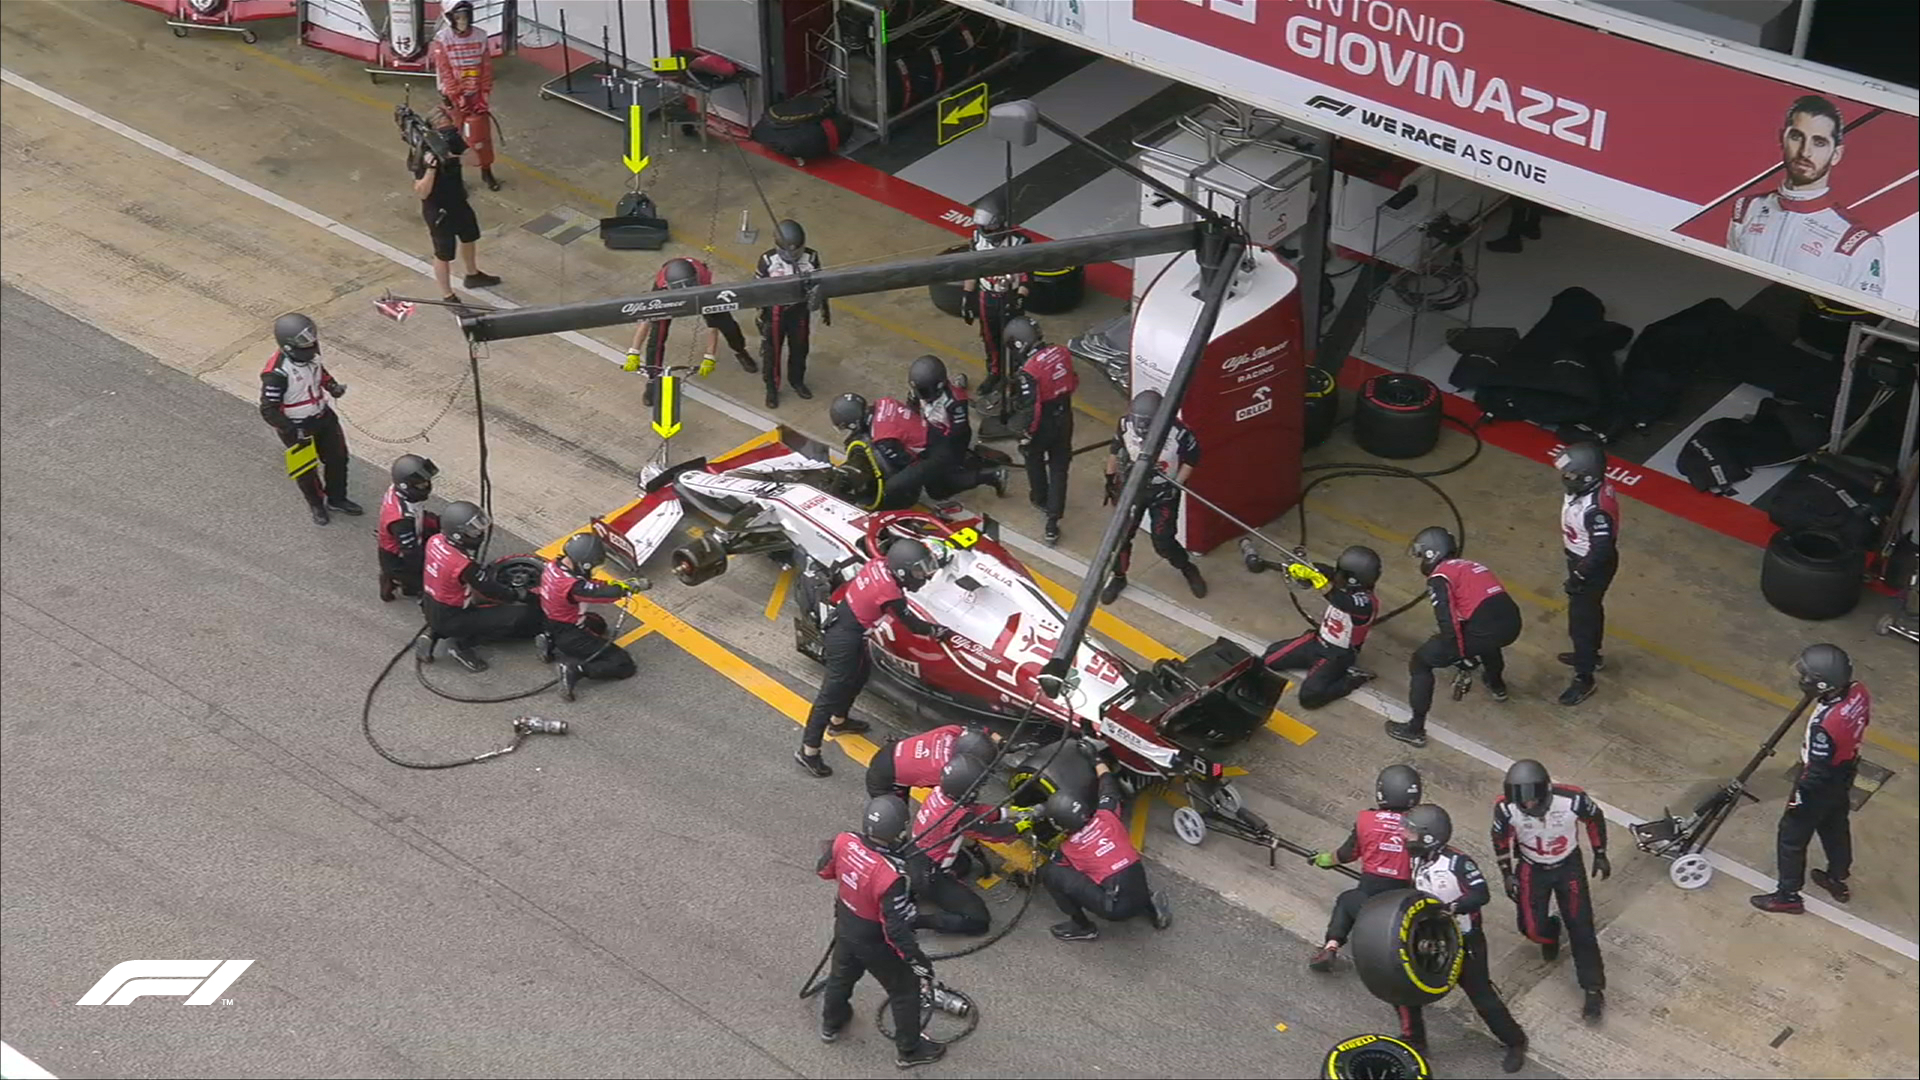 Bizzare pitstop for Giovinazzi after crew brings out a punctured tyre